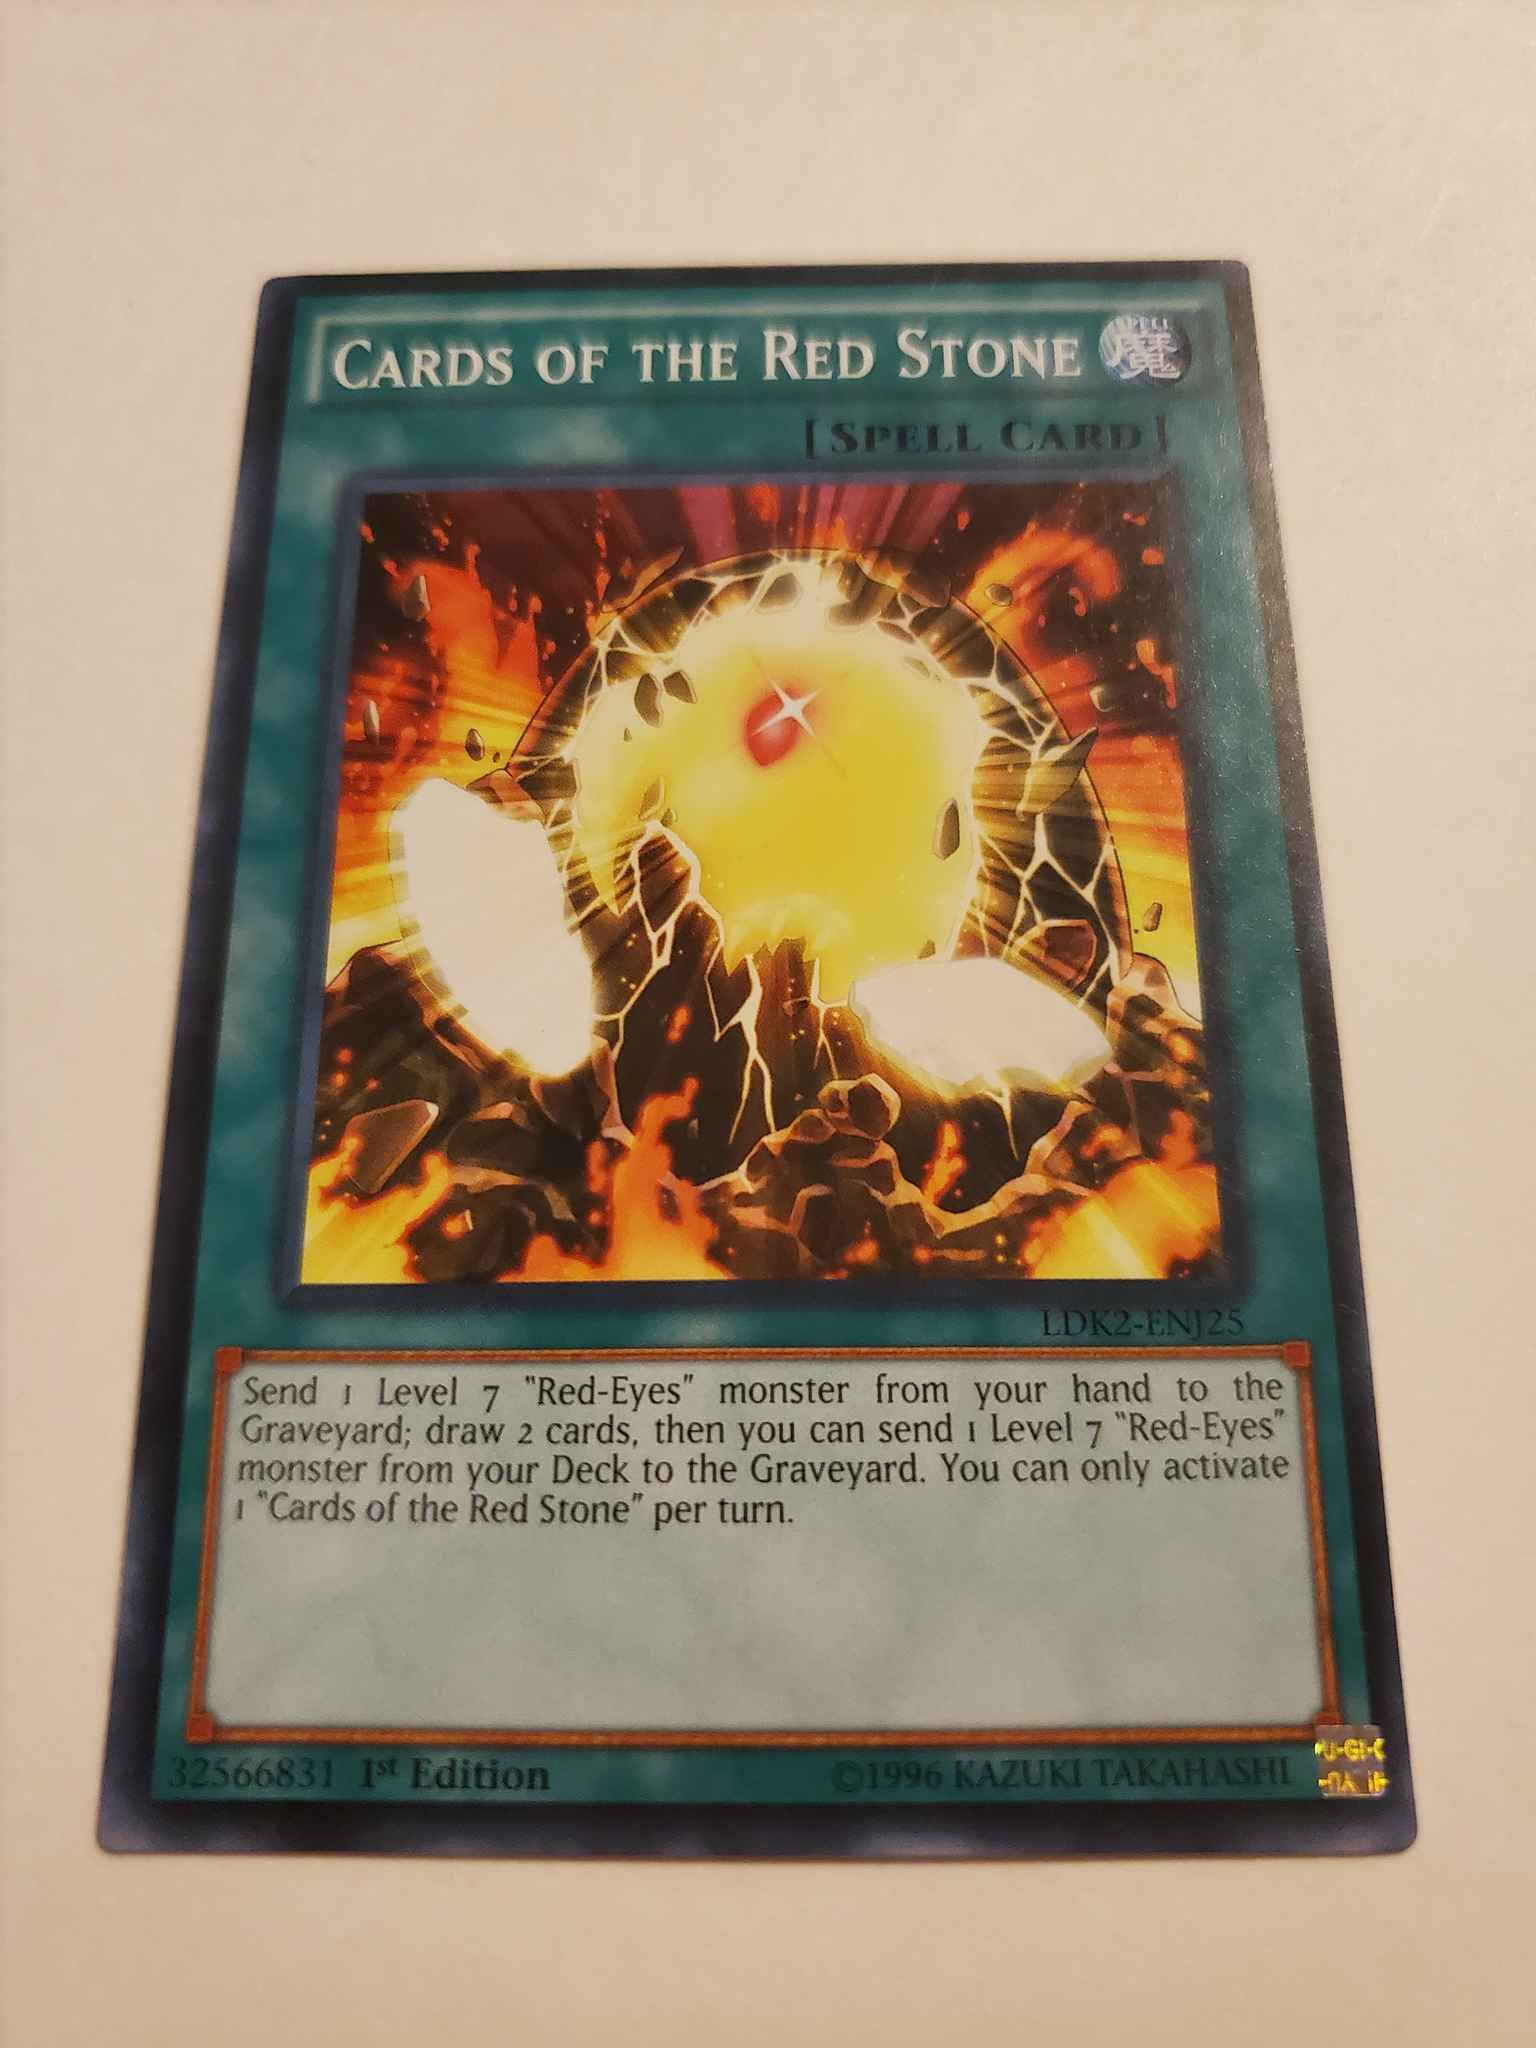 YUGIOH! Near Mint "Cards of the Red Stone" LDK2-ENJ25 2.Ed! Common 